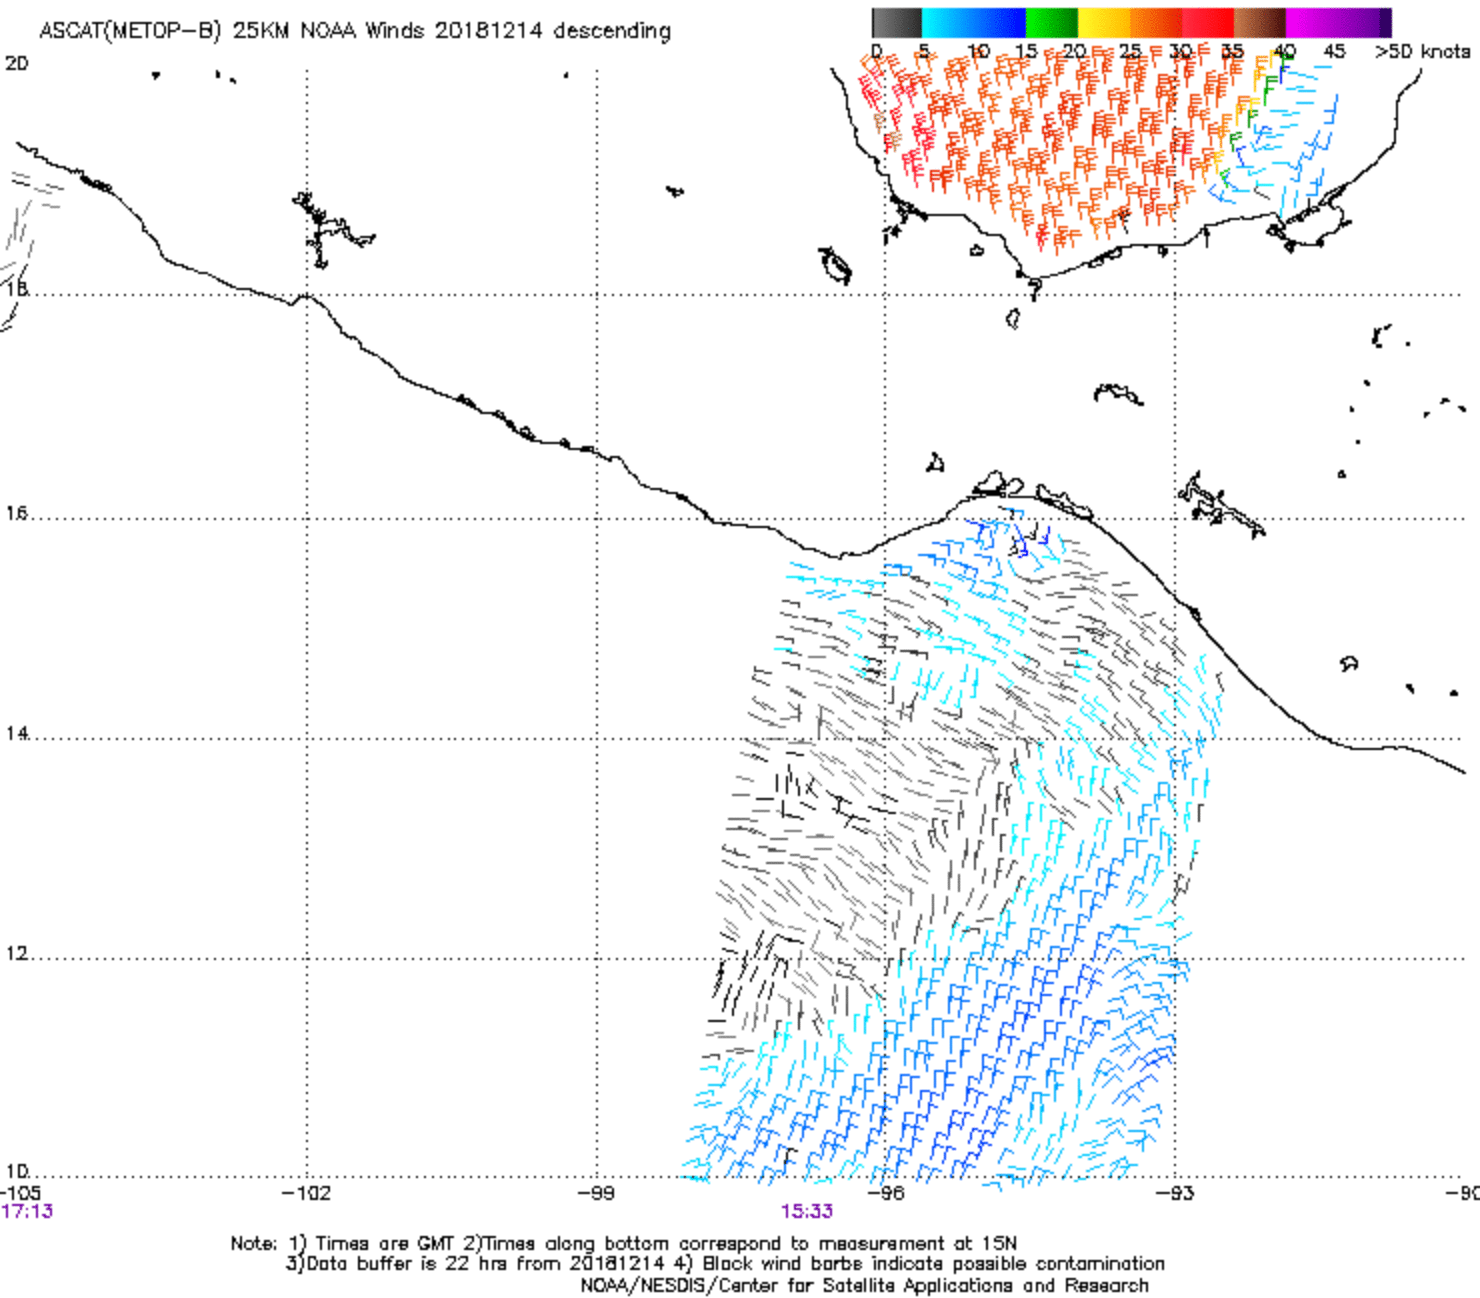 Metop-A and Metop-B ASCAT surface scatterometer winds across the southern Gulf of Mexico and the Gulf of Tehuantepec [click to enlarge]